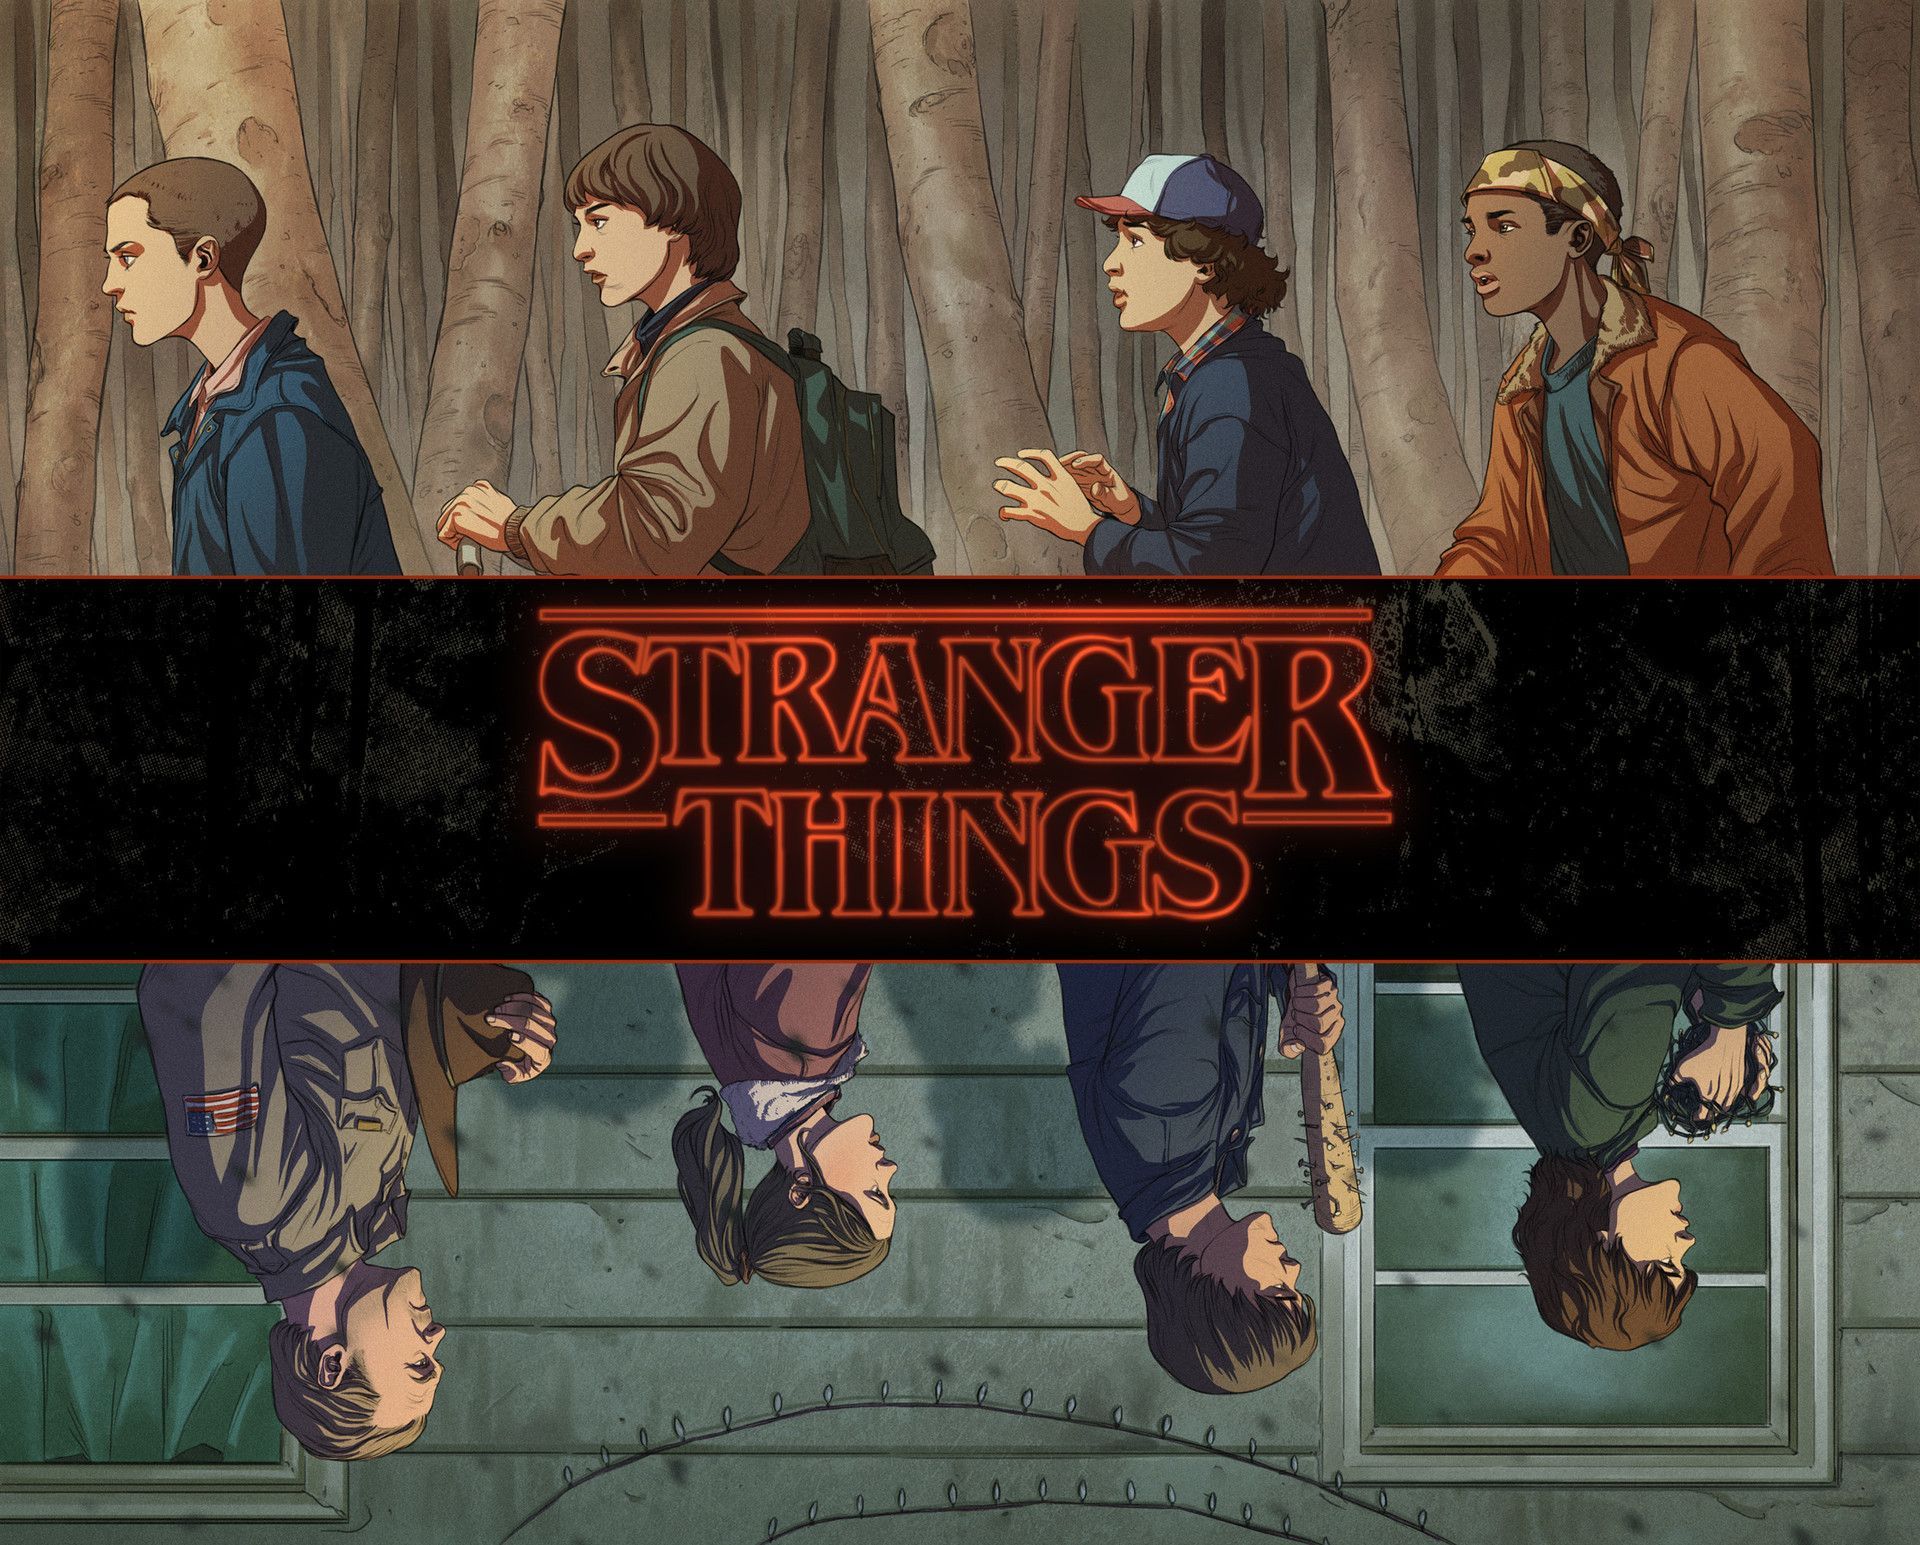 The Upside Down is a world of upside-down images, where the characters of Stranger Things are all upside down. - Stranger Things